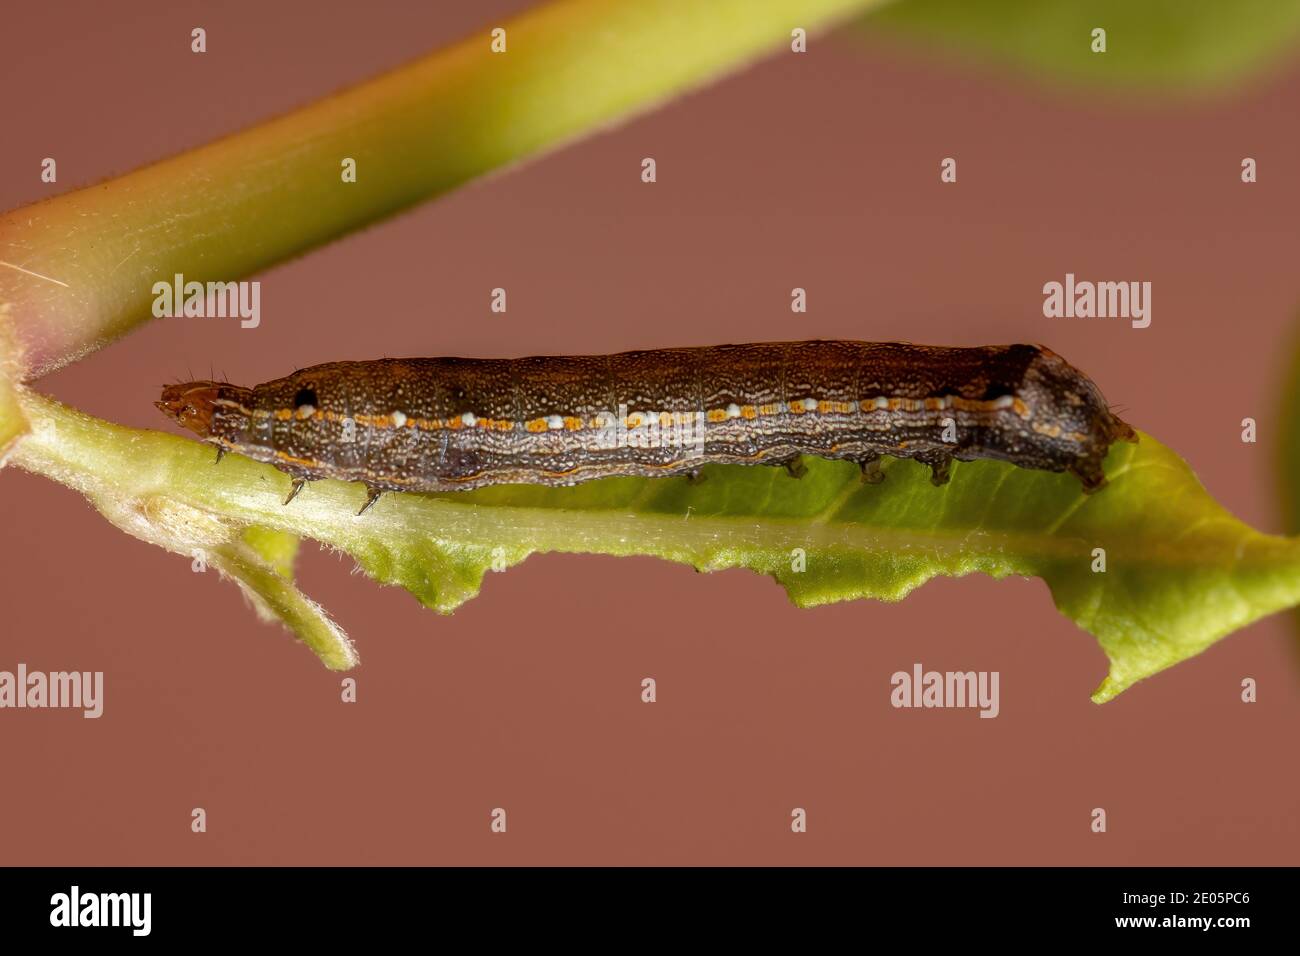 Caterpillar of the genus Spodoptera eating a leaf Stock Photo